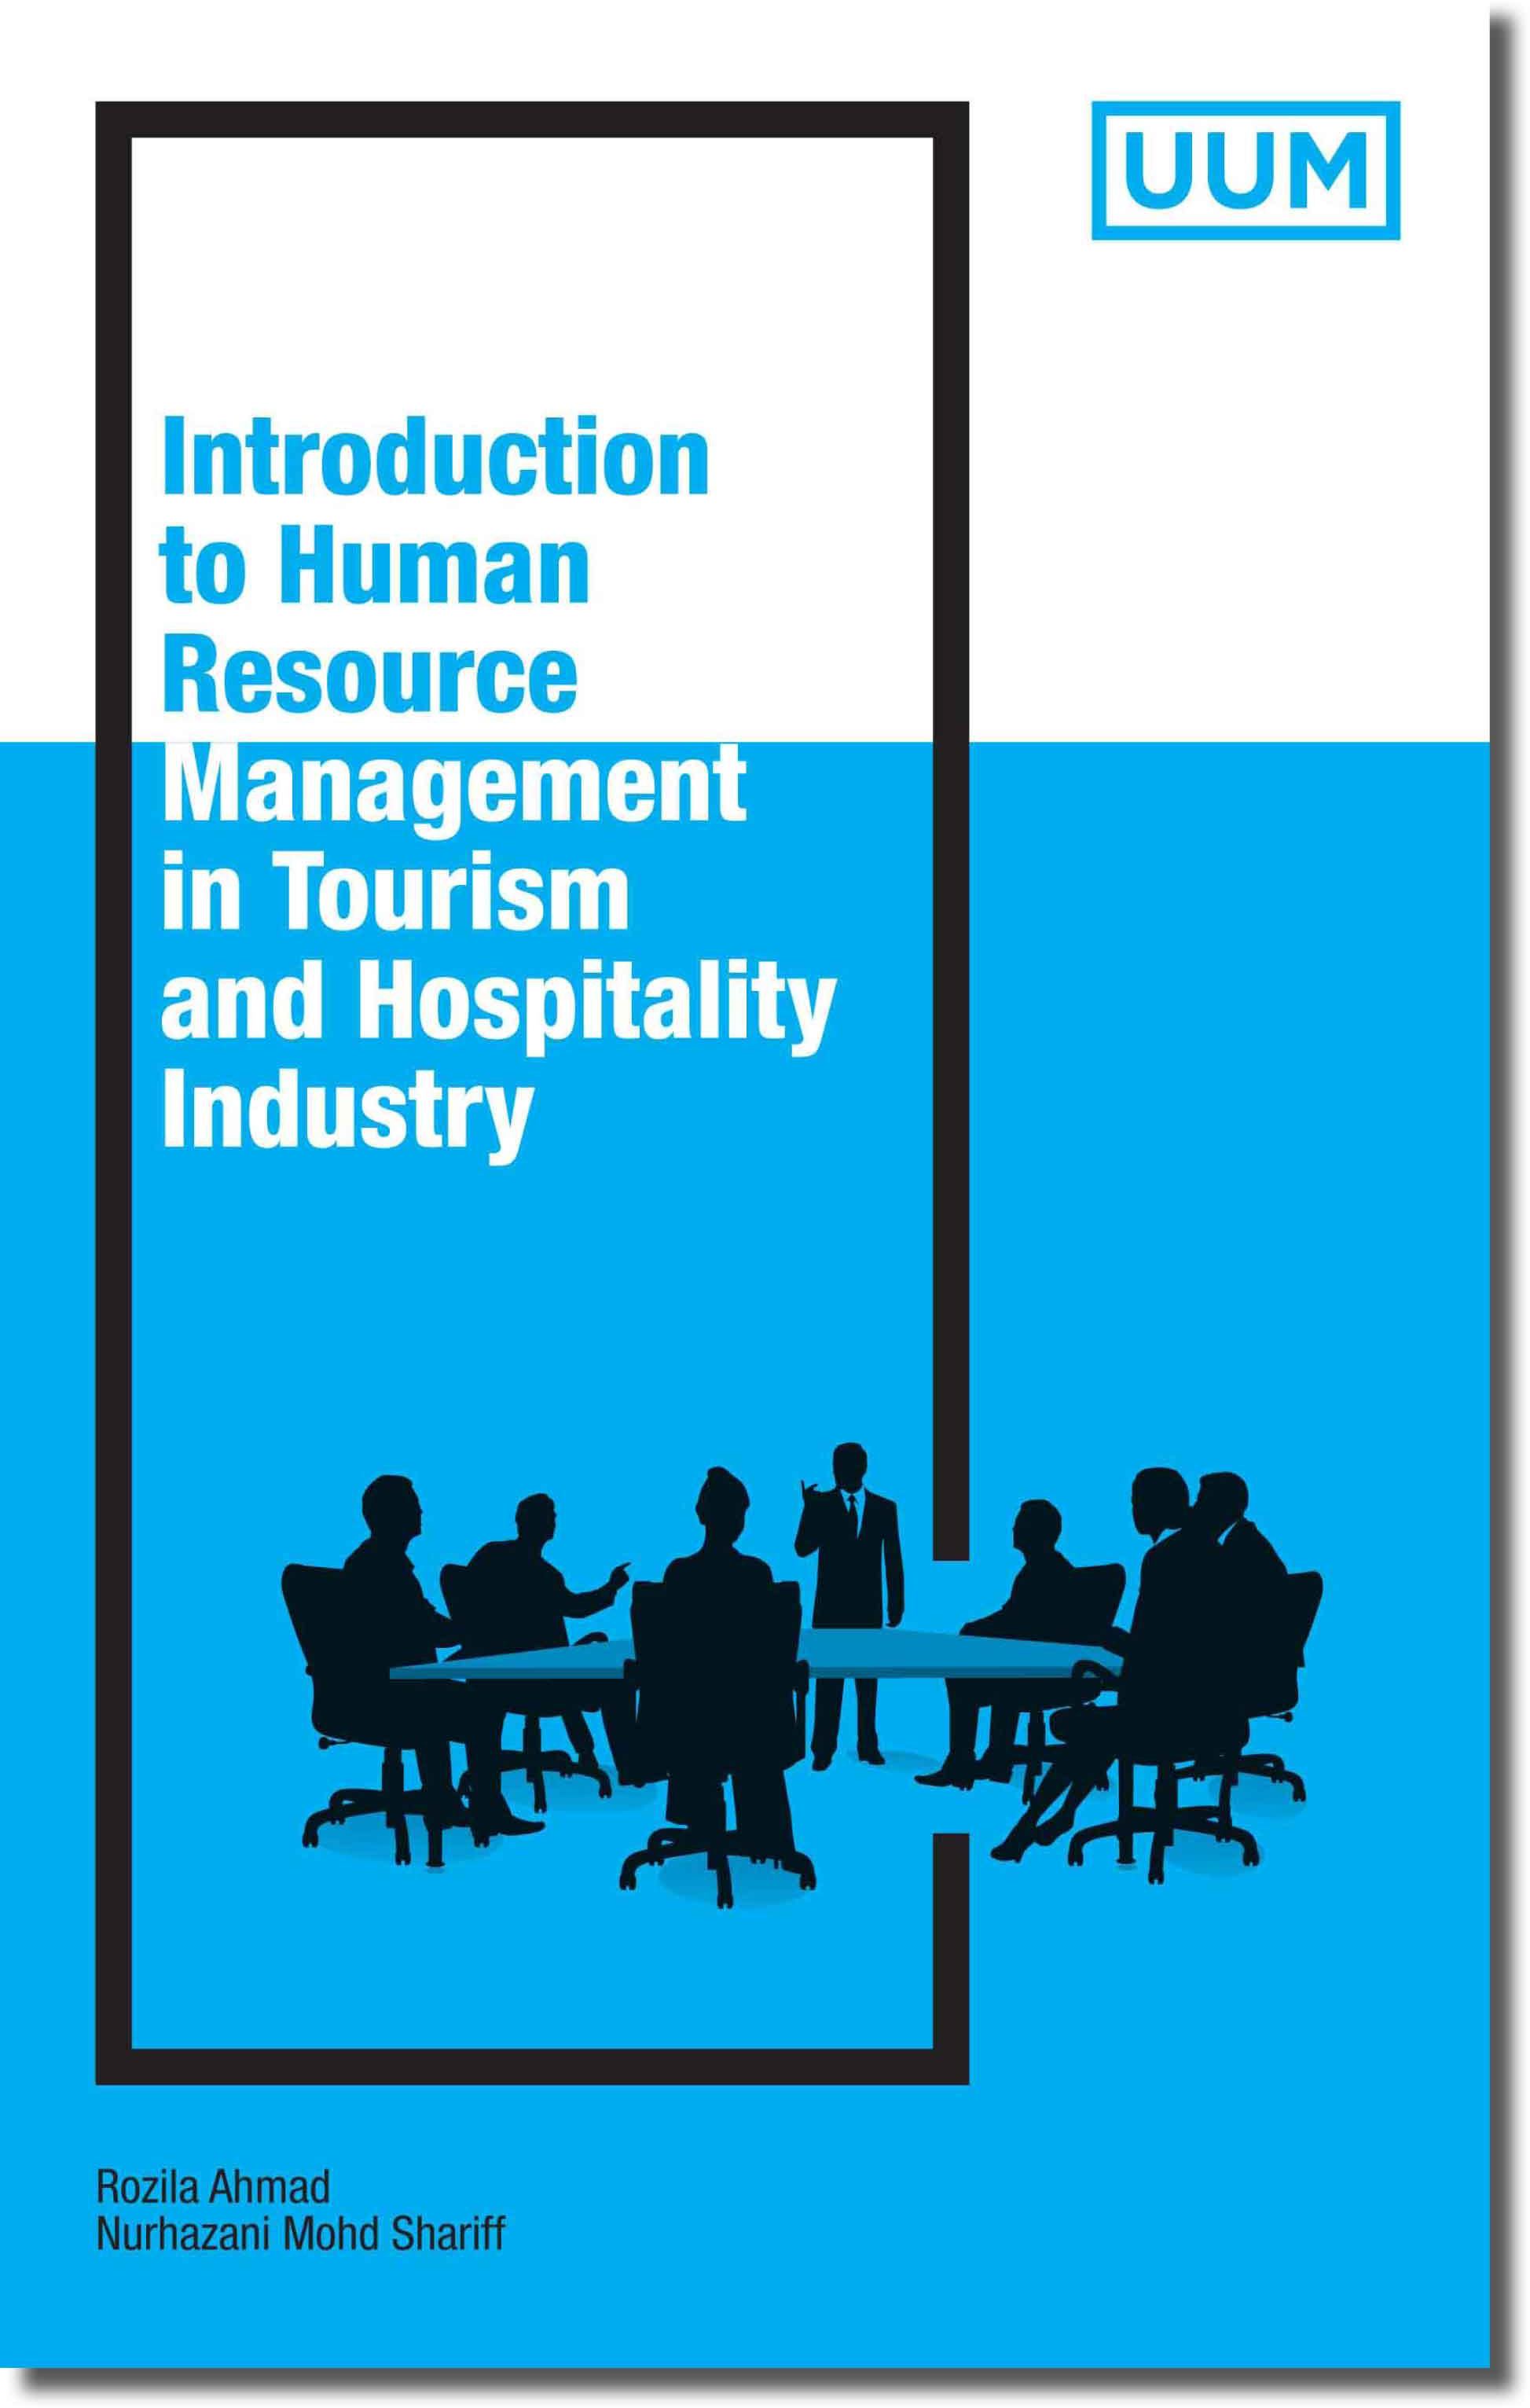 Introduction to Human Resource Management in Tourism, Hospitality Industry